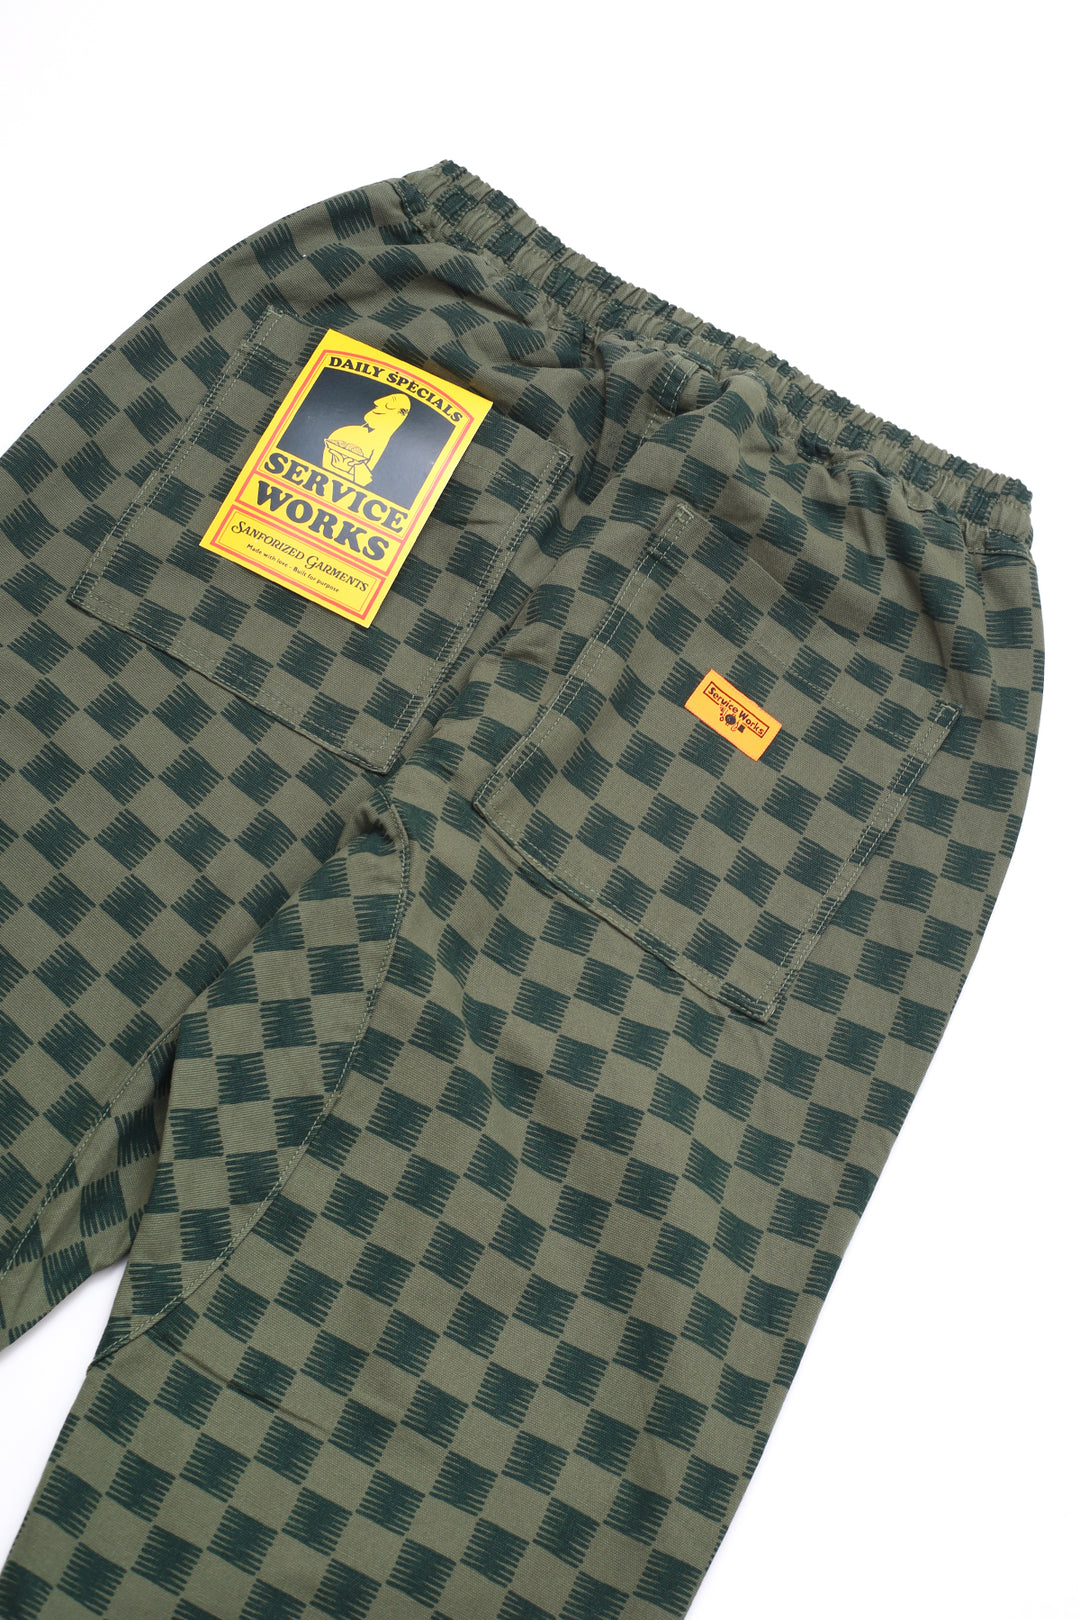 Service Works - Classic Chef Pants - Green Checker